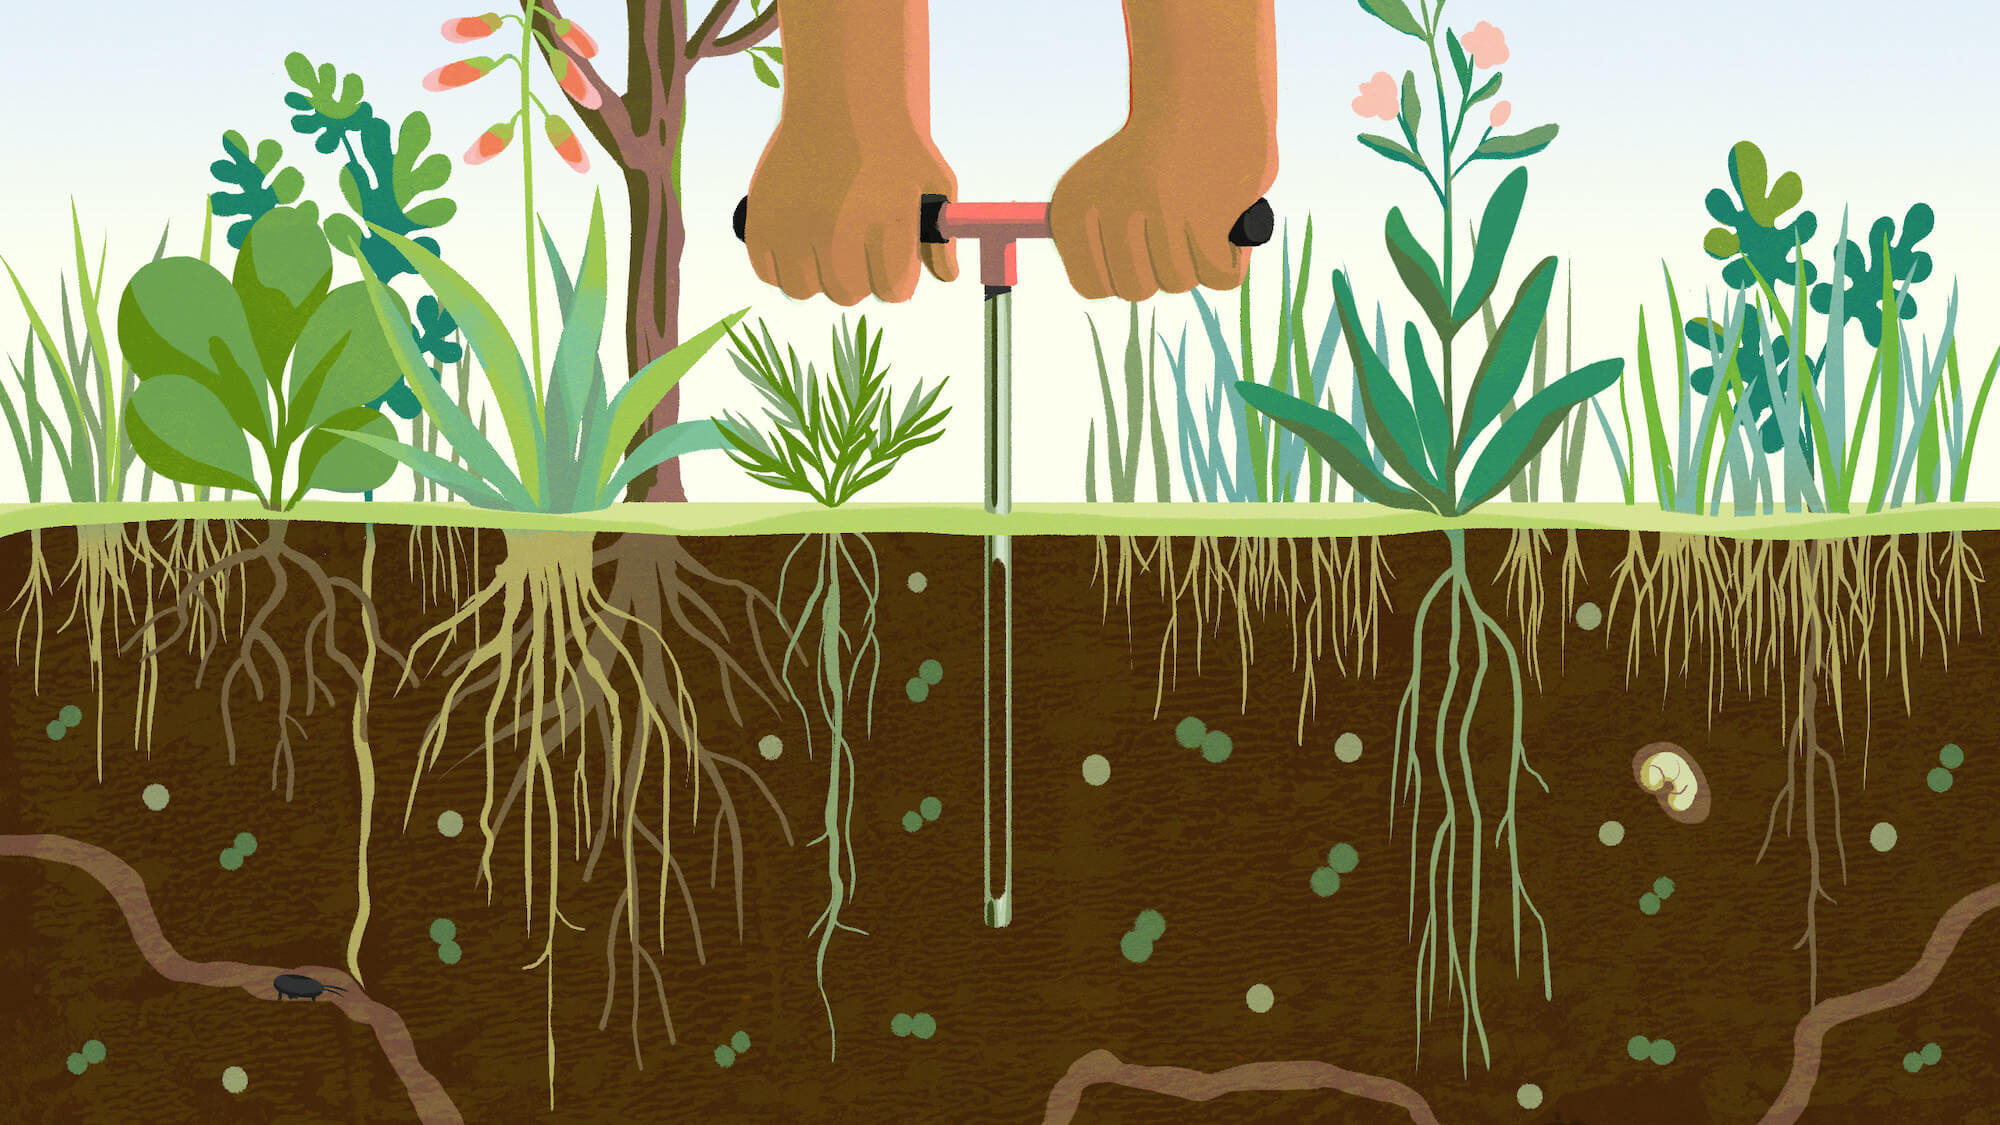 Illustration of a regenerative farmer testing for sequestered carbon using a soil probe (May 2021)